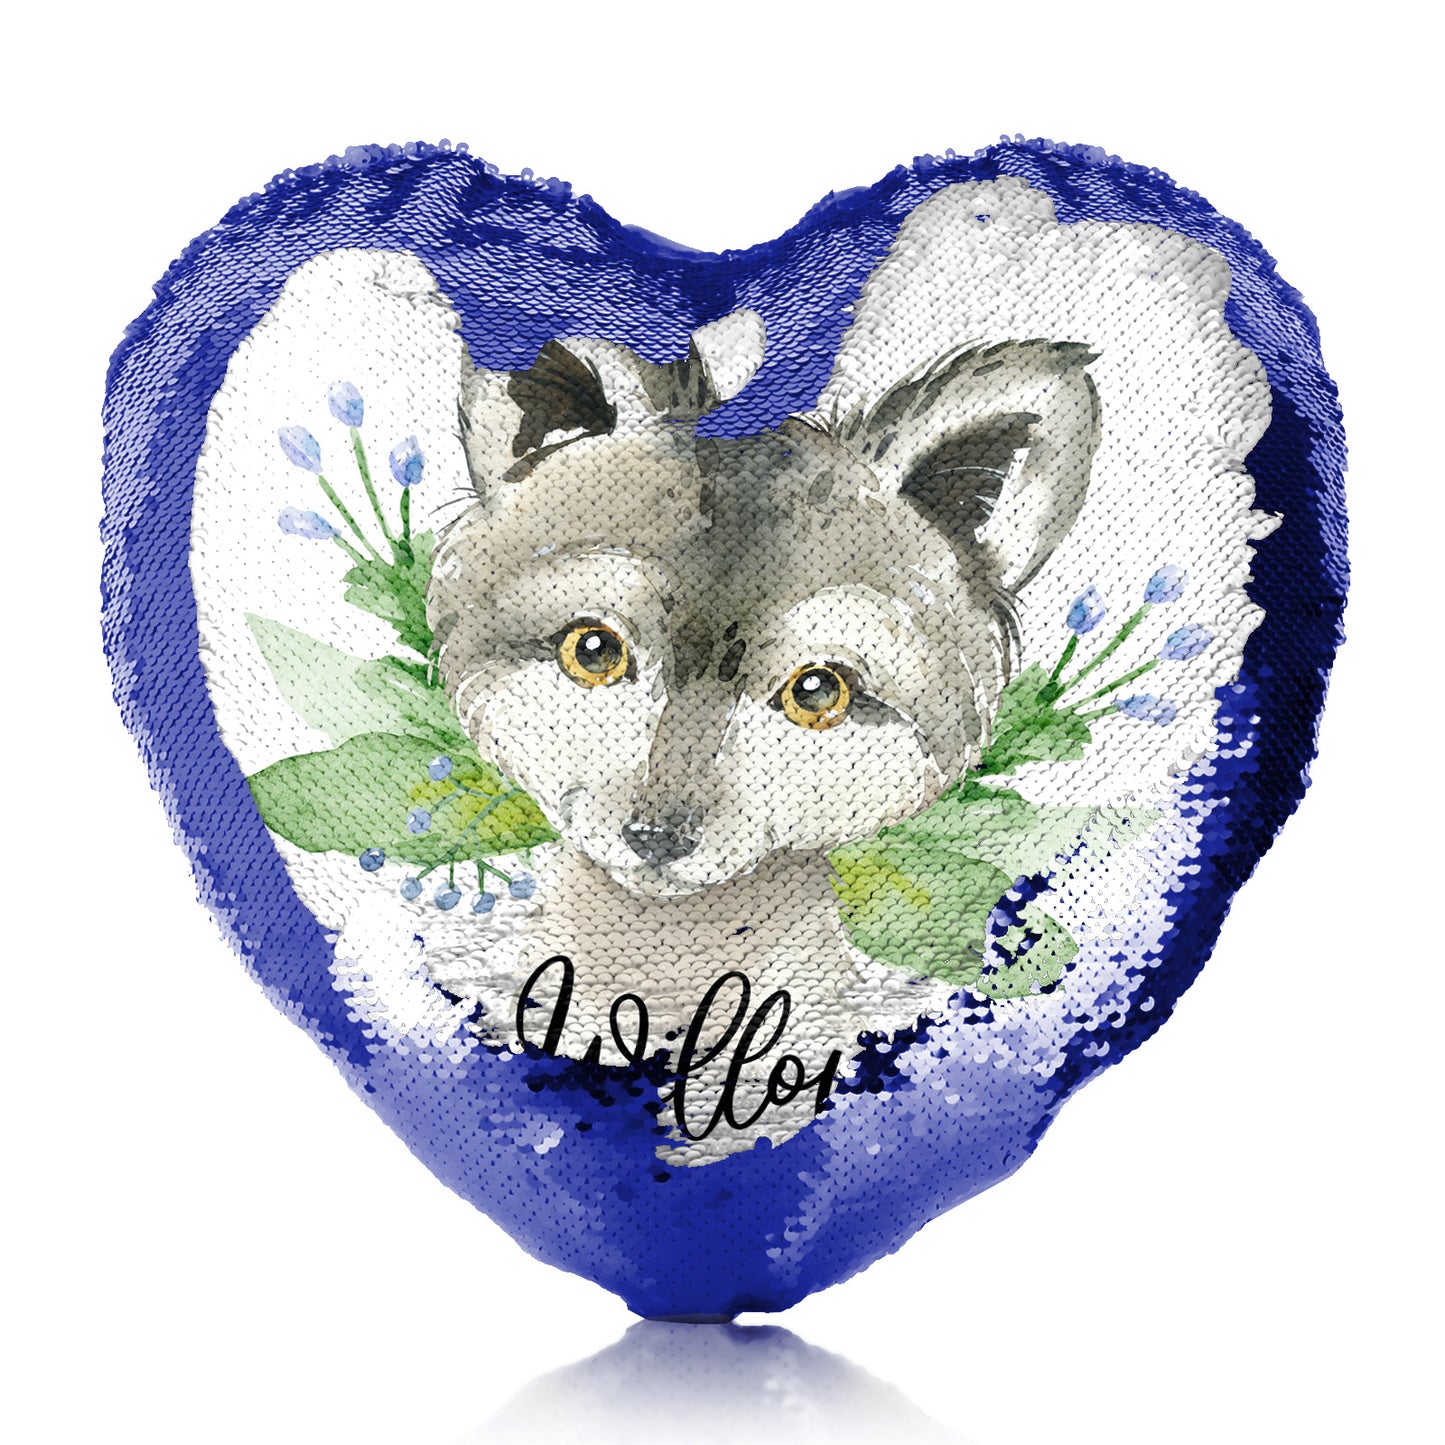 Personalised Sequin Heart Cushion with Grey Wolf Blue Flowers and Cute Text